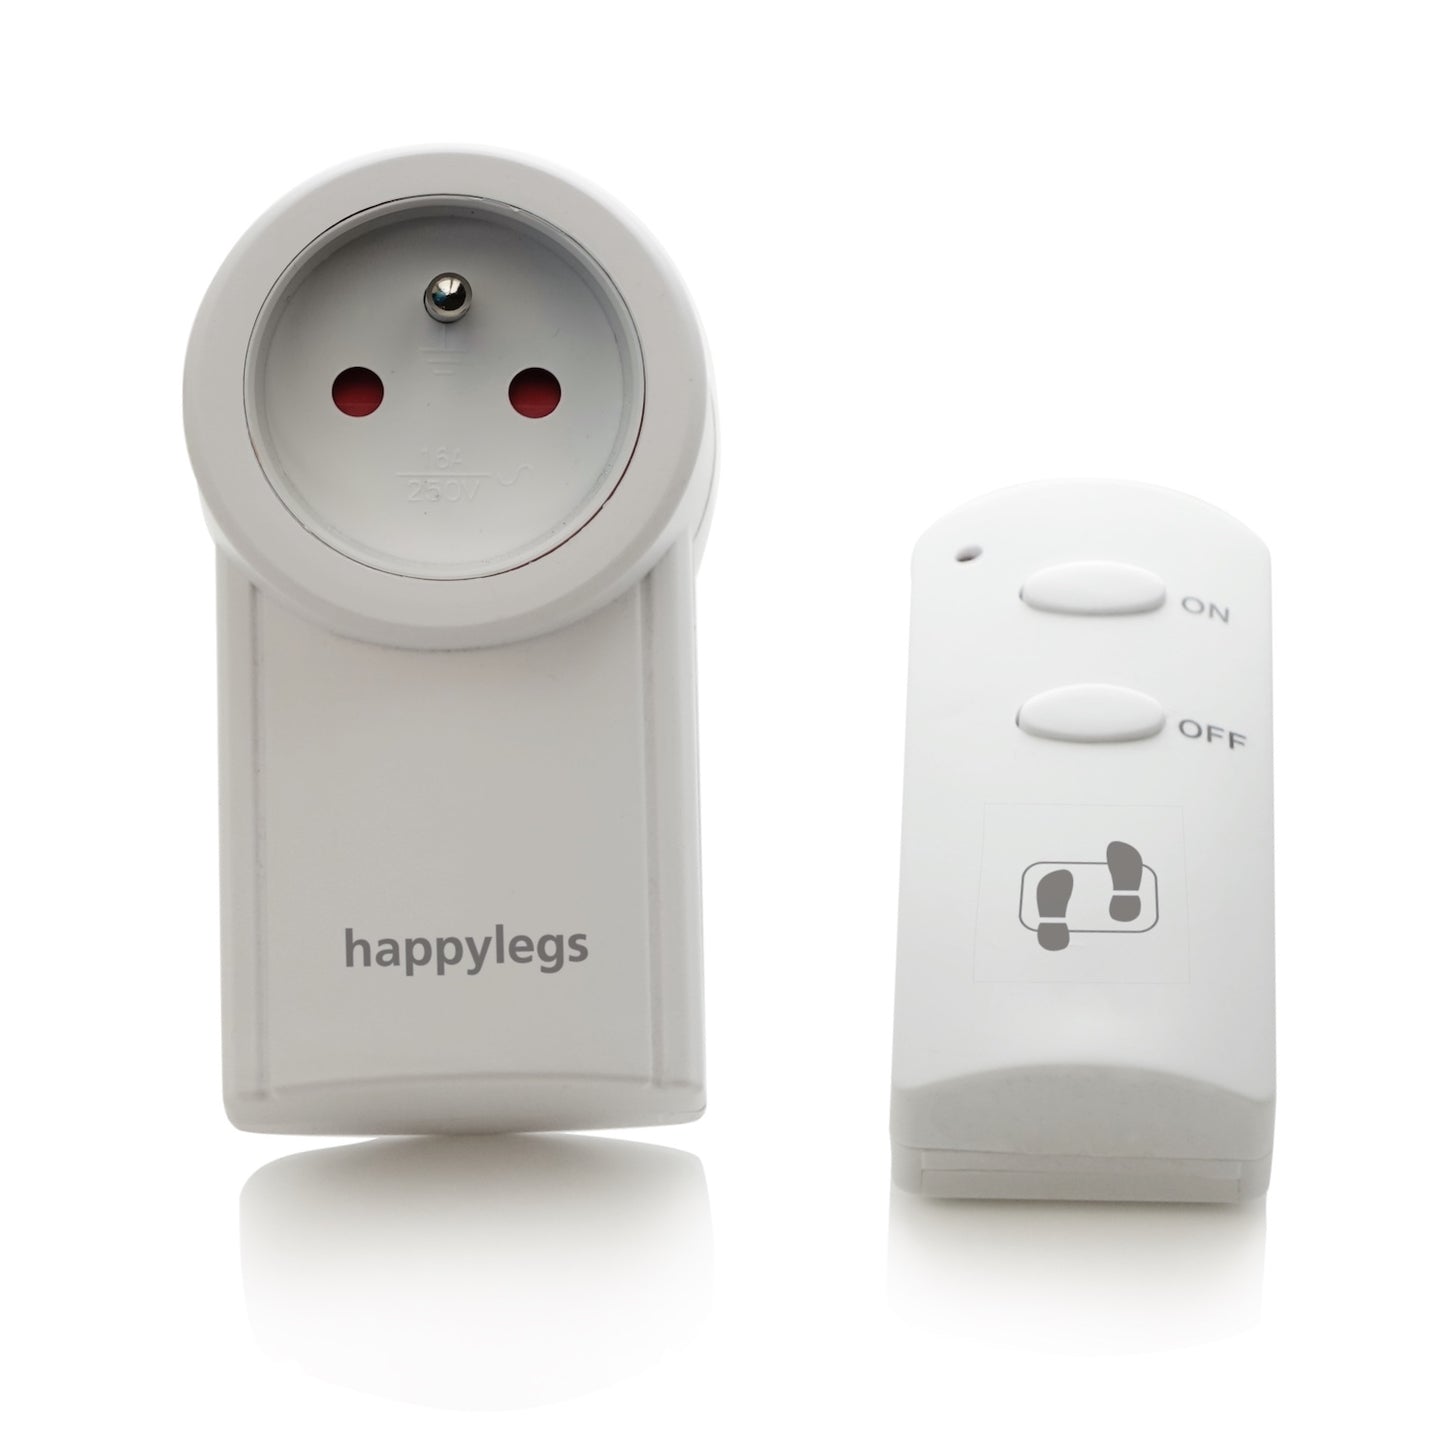 Remote control for Happylegs